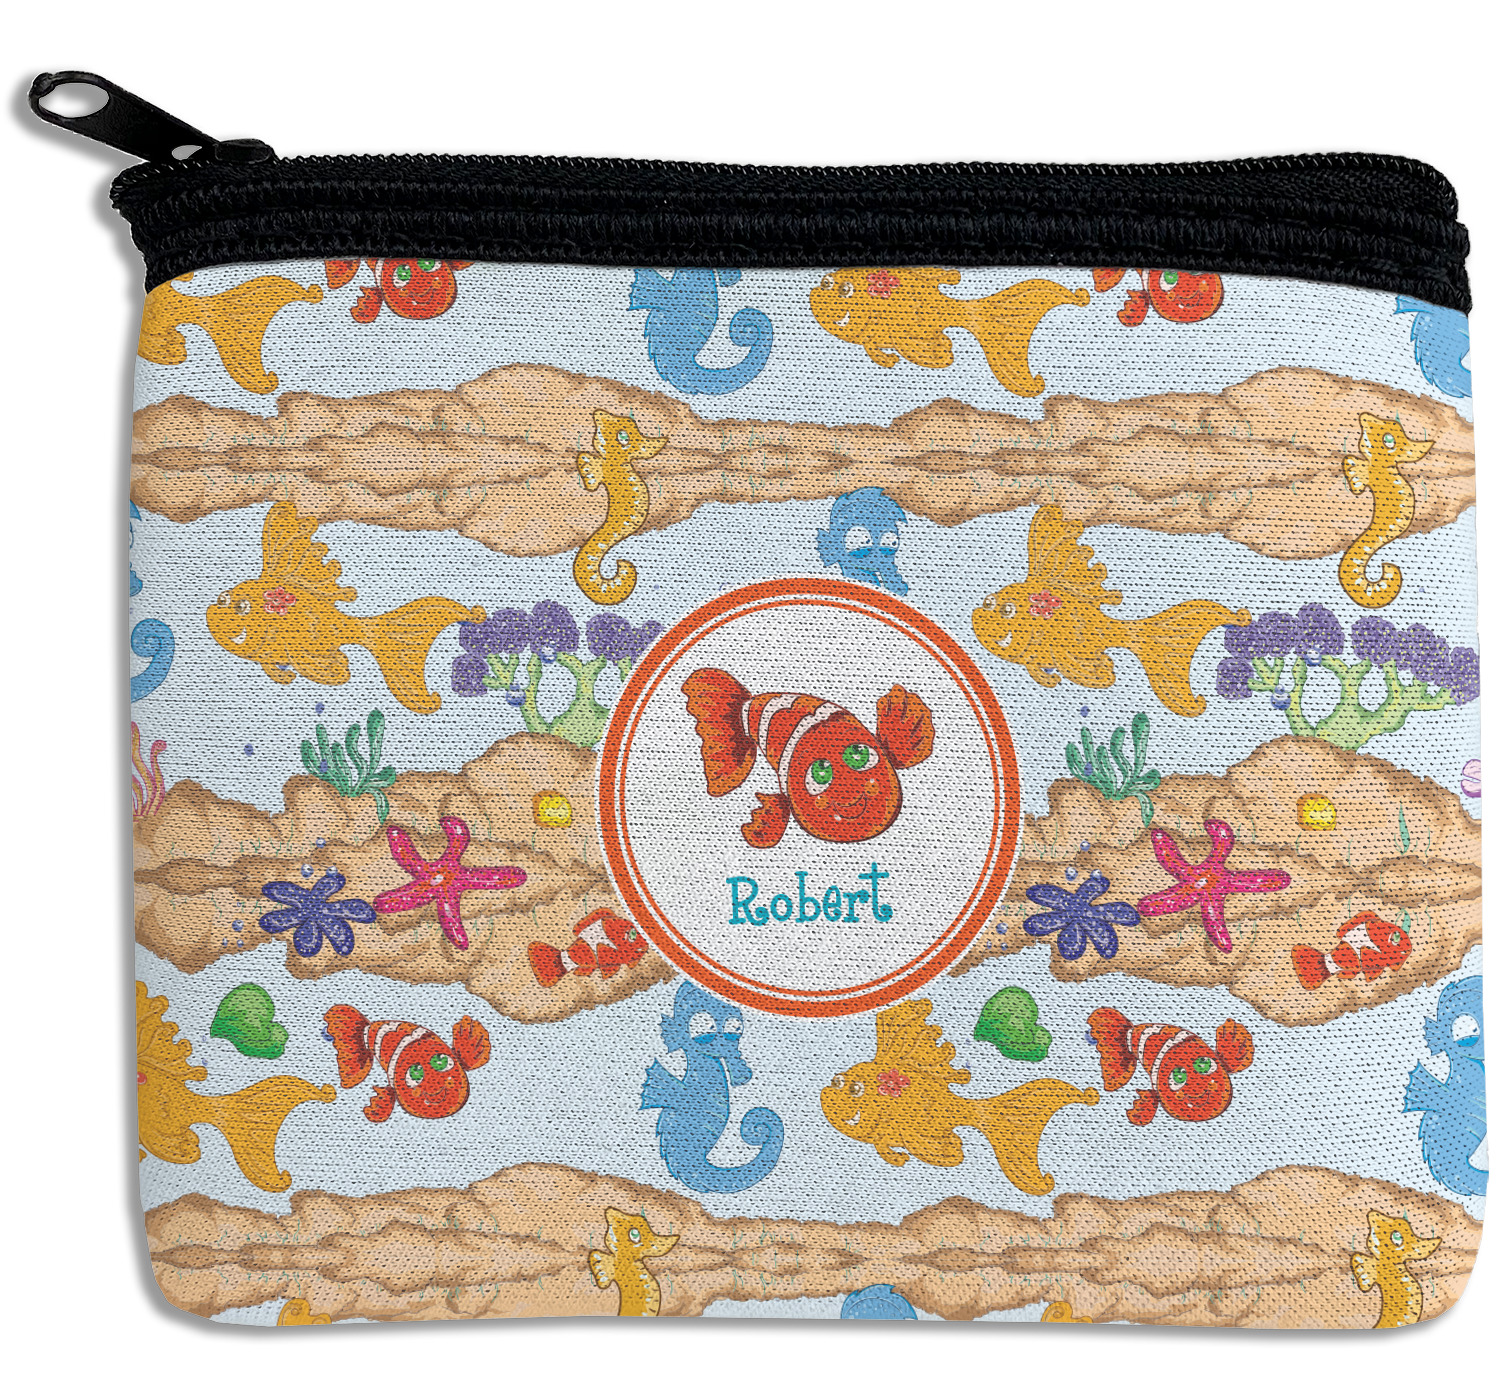 Under the Sea Rectangular Coin Purse (Personalized) - YouCustomizeIt